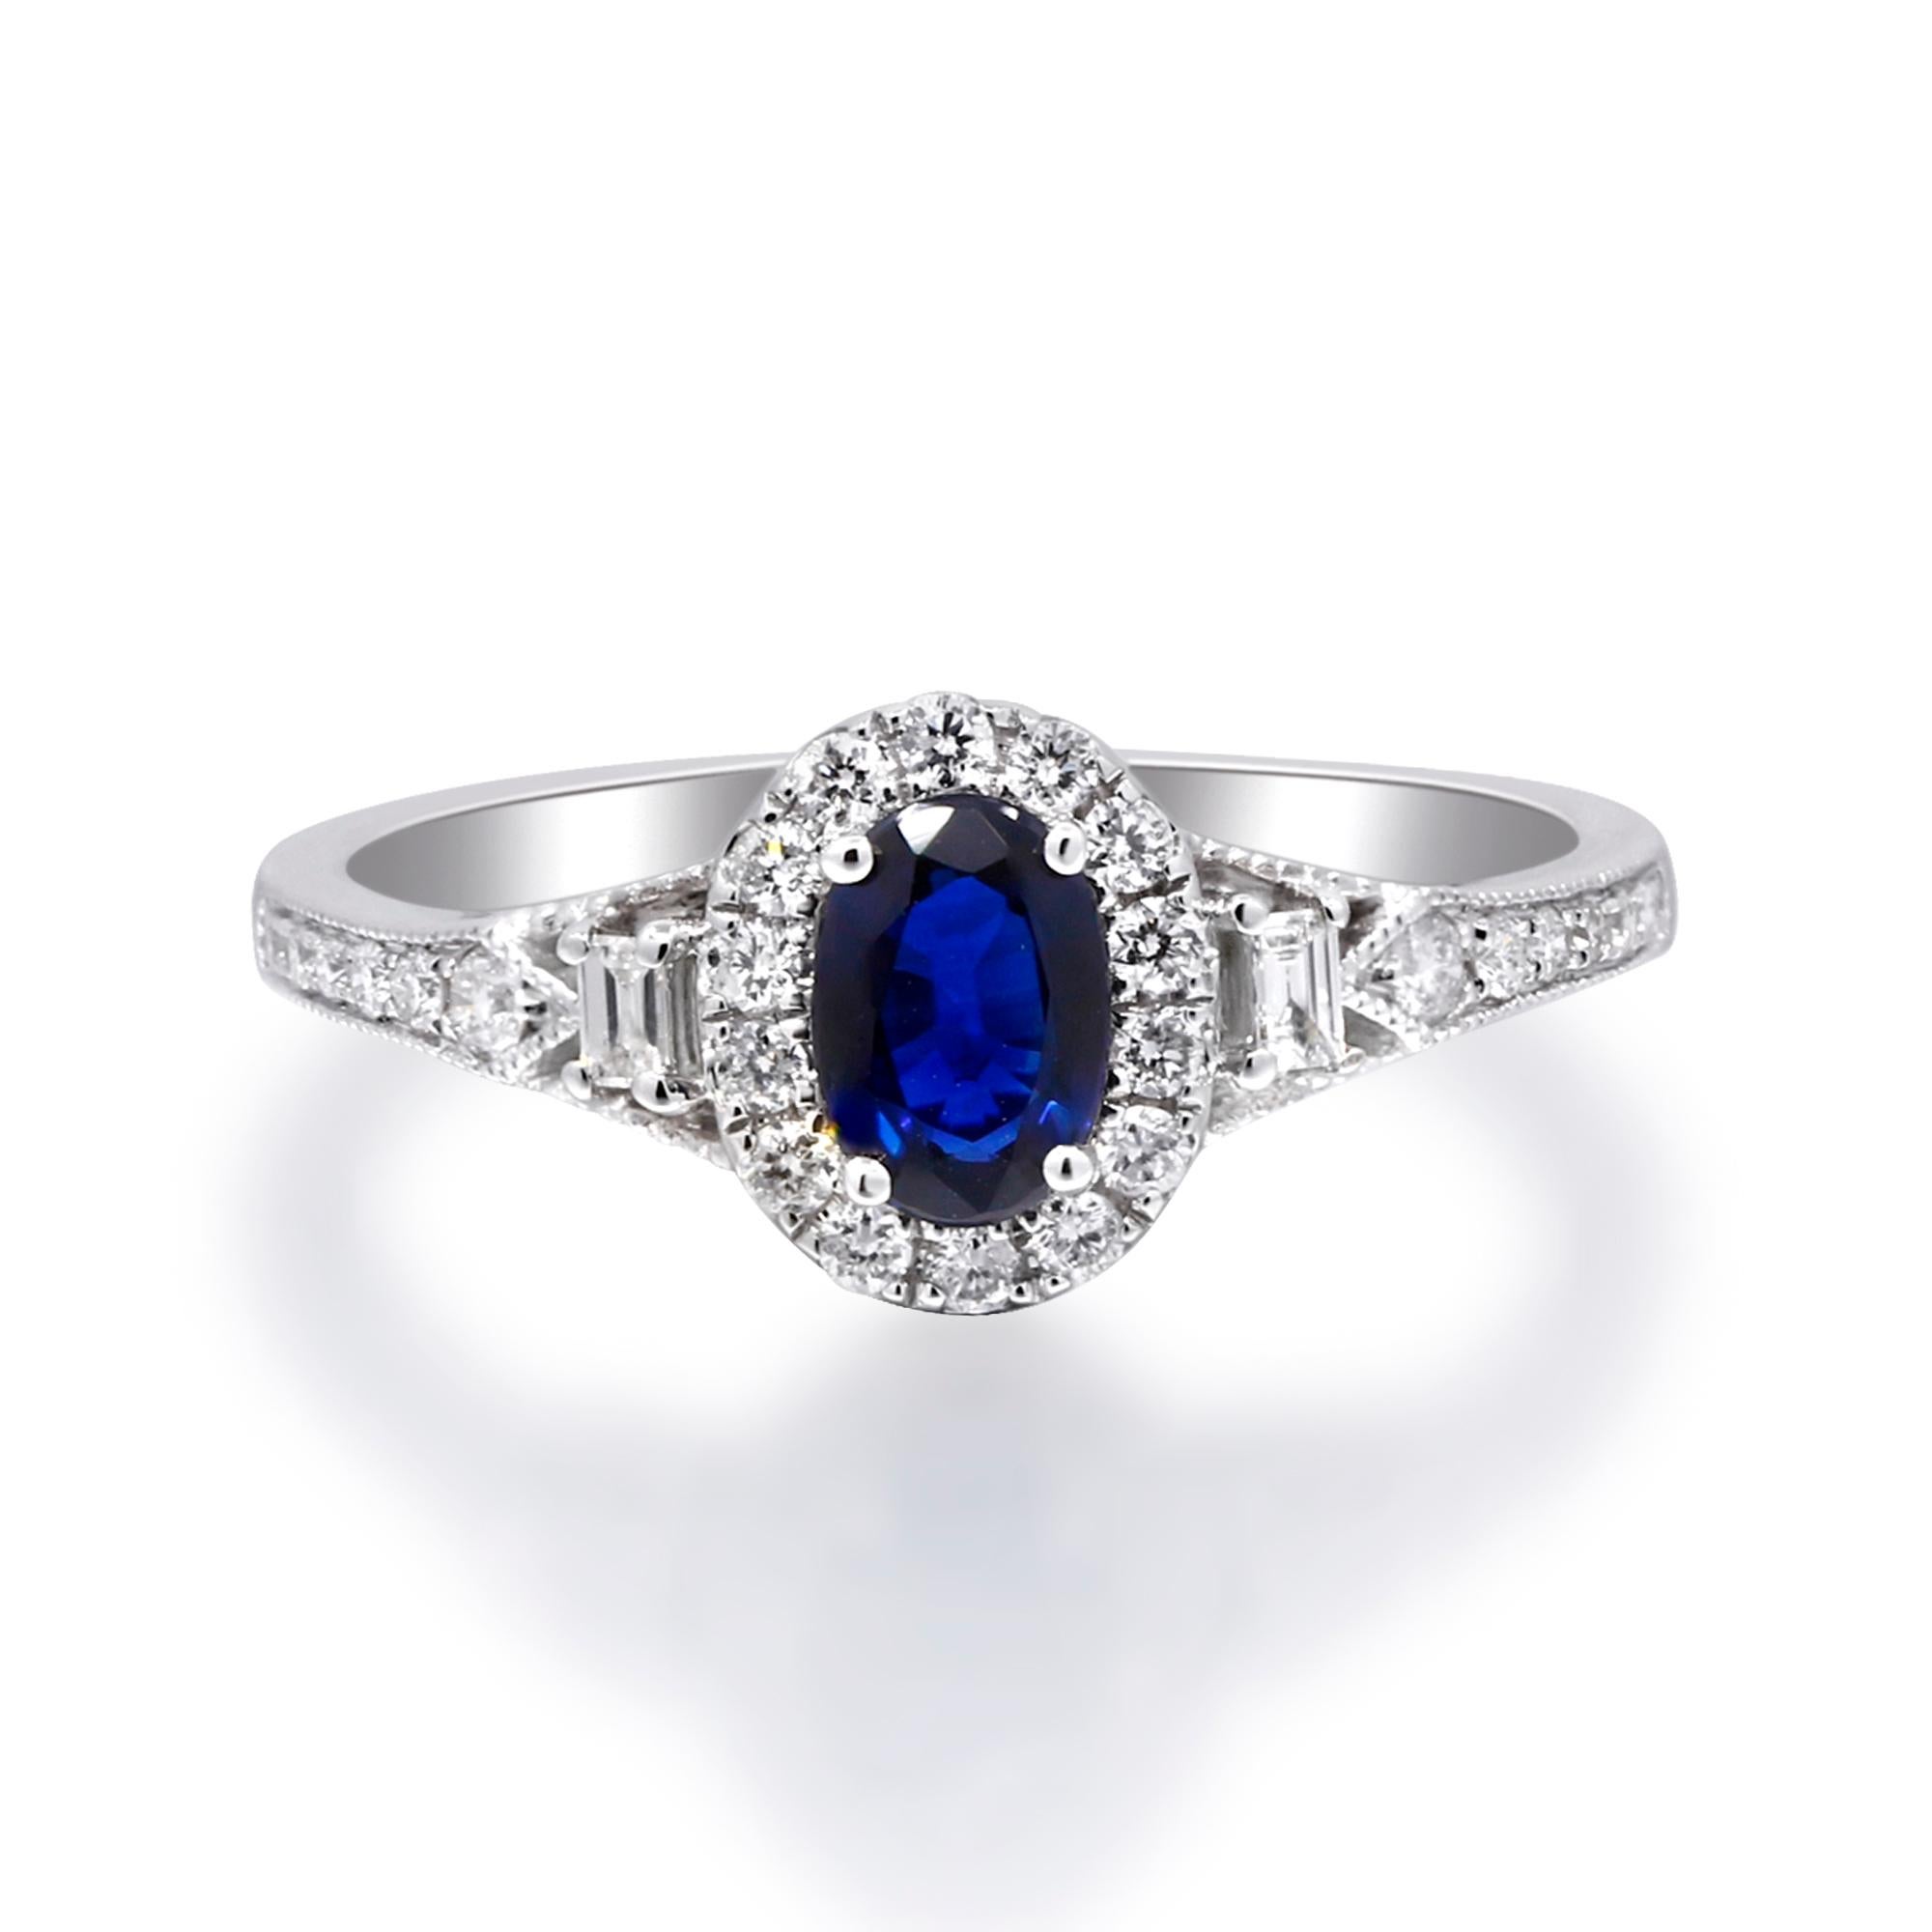 0.58 Carat Oval-Cut Blue Sapphire with Diamond Accents 14K White Gold Ring In New Condition For Sale In New York, NY